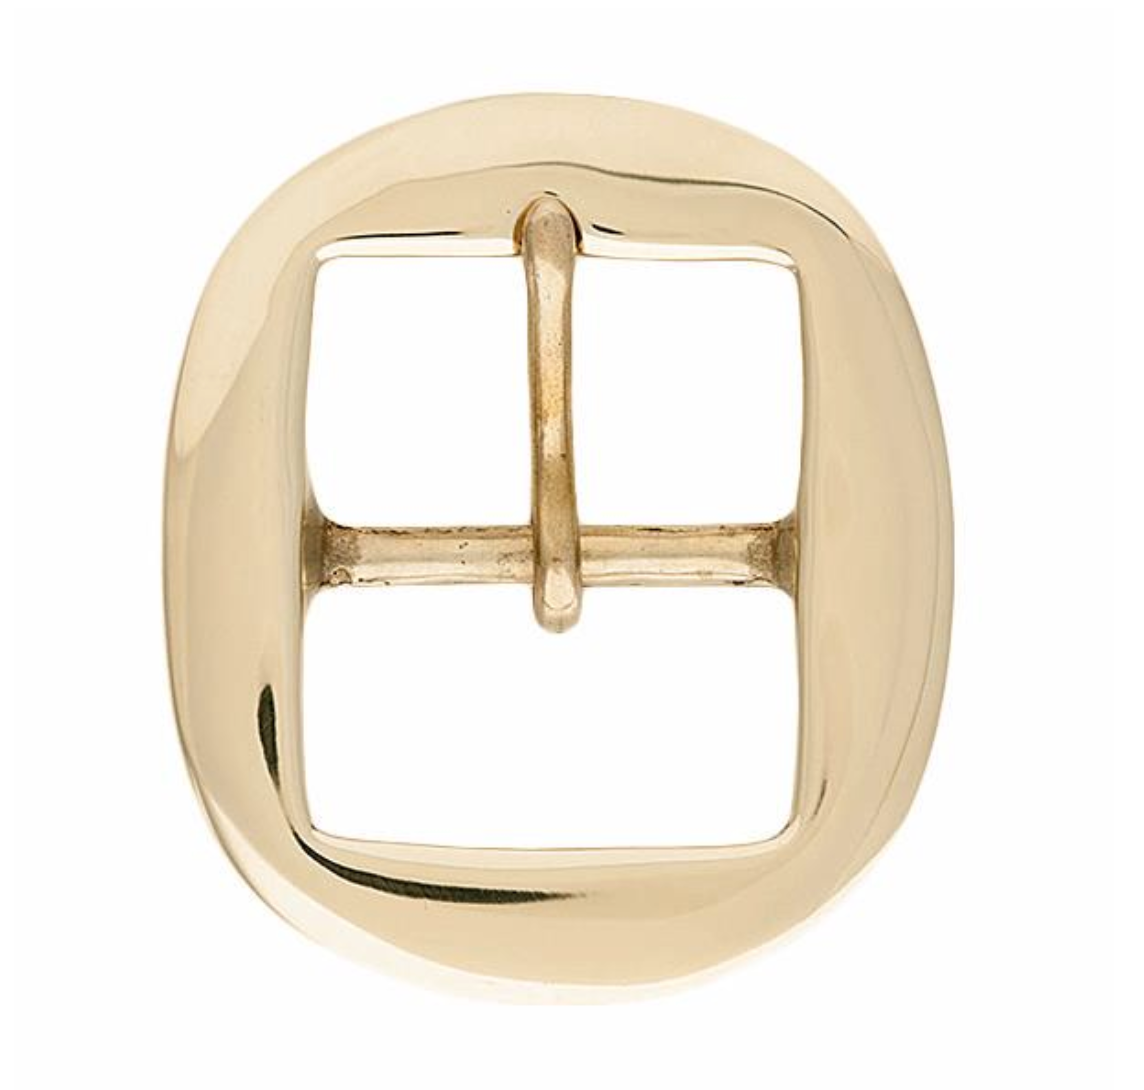 Solid Brass Buckle -  Canada